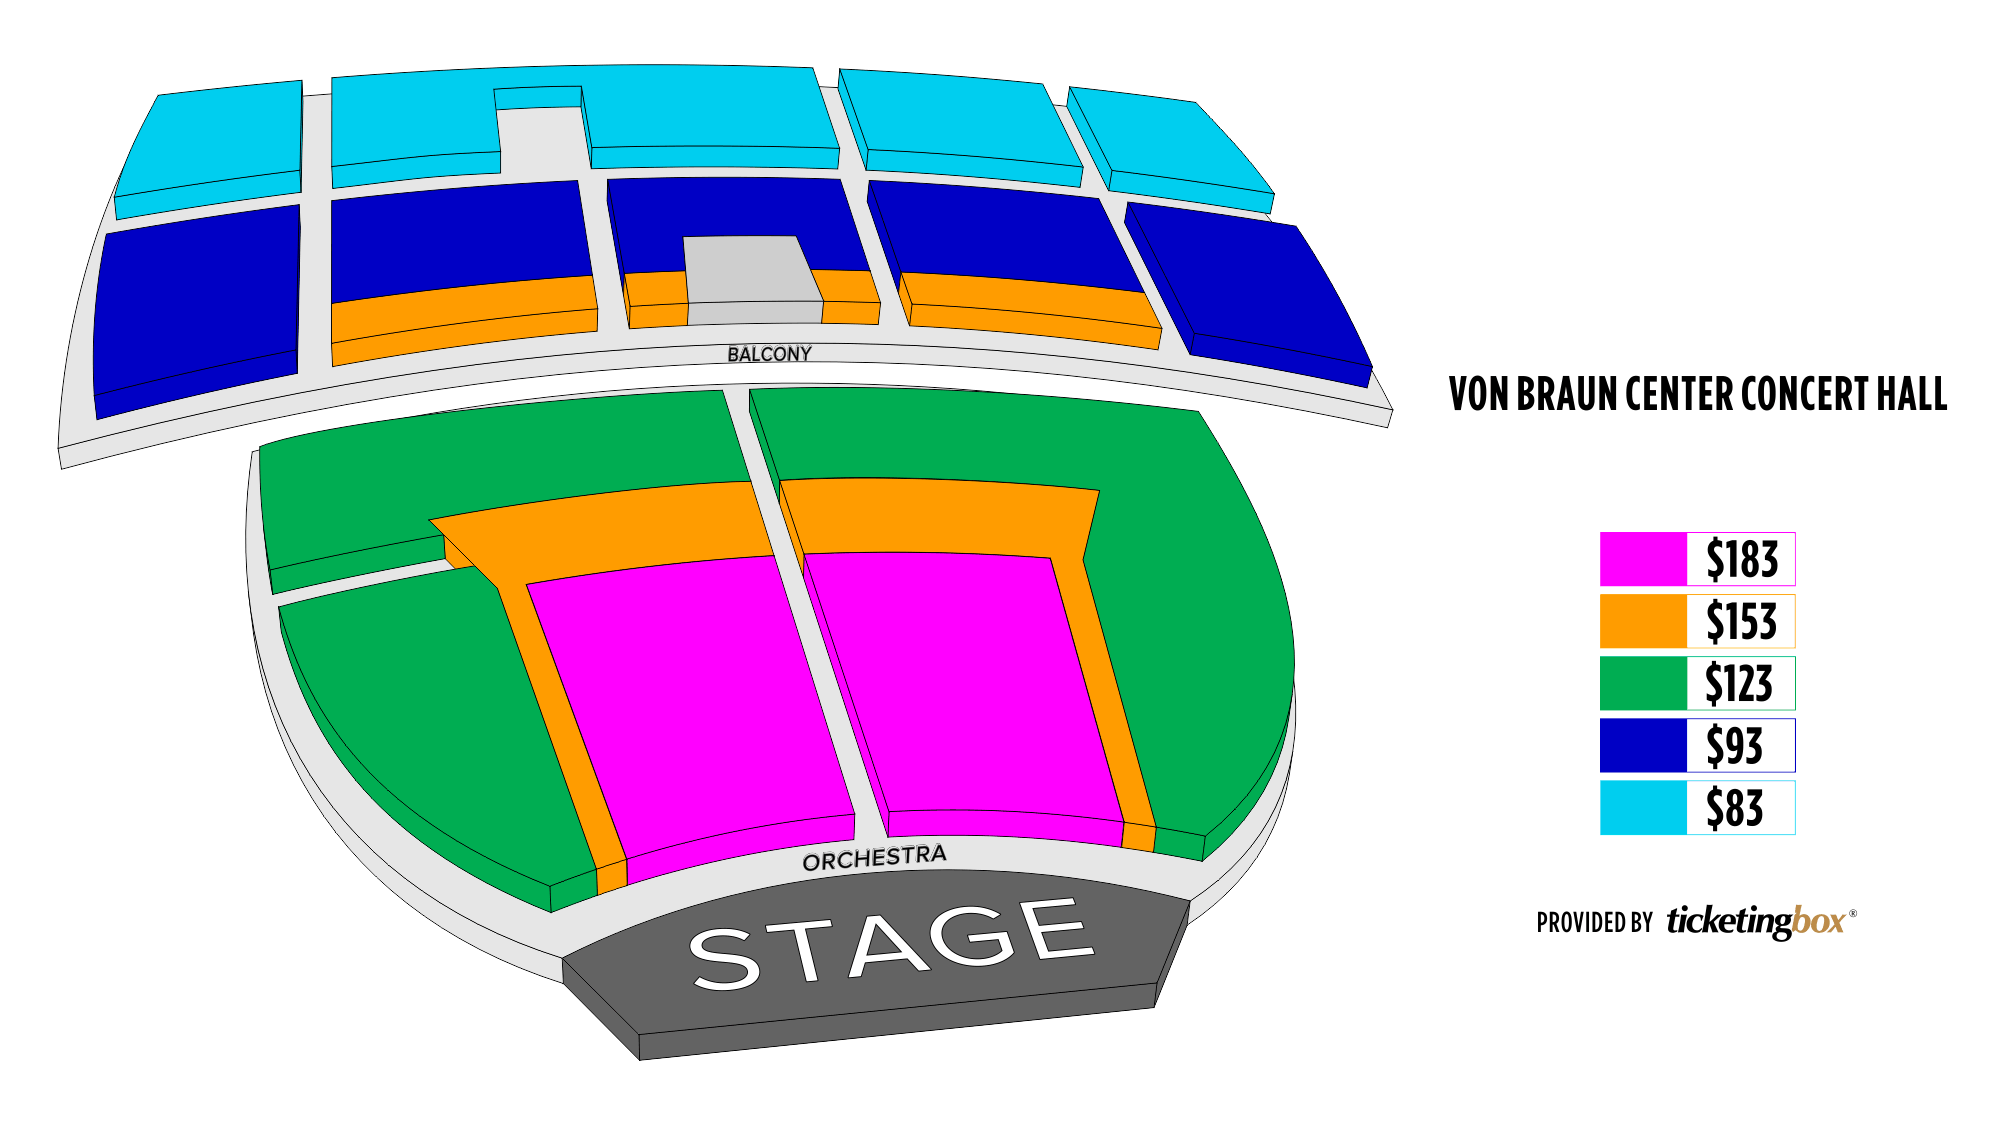 Glasgow Concert Hall Seating Chart | My XXX Hot Girl